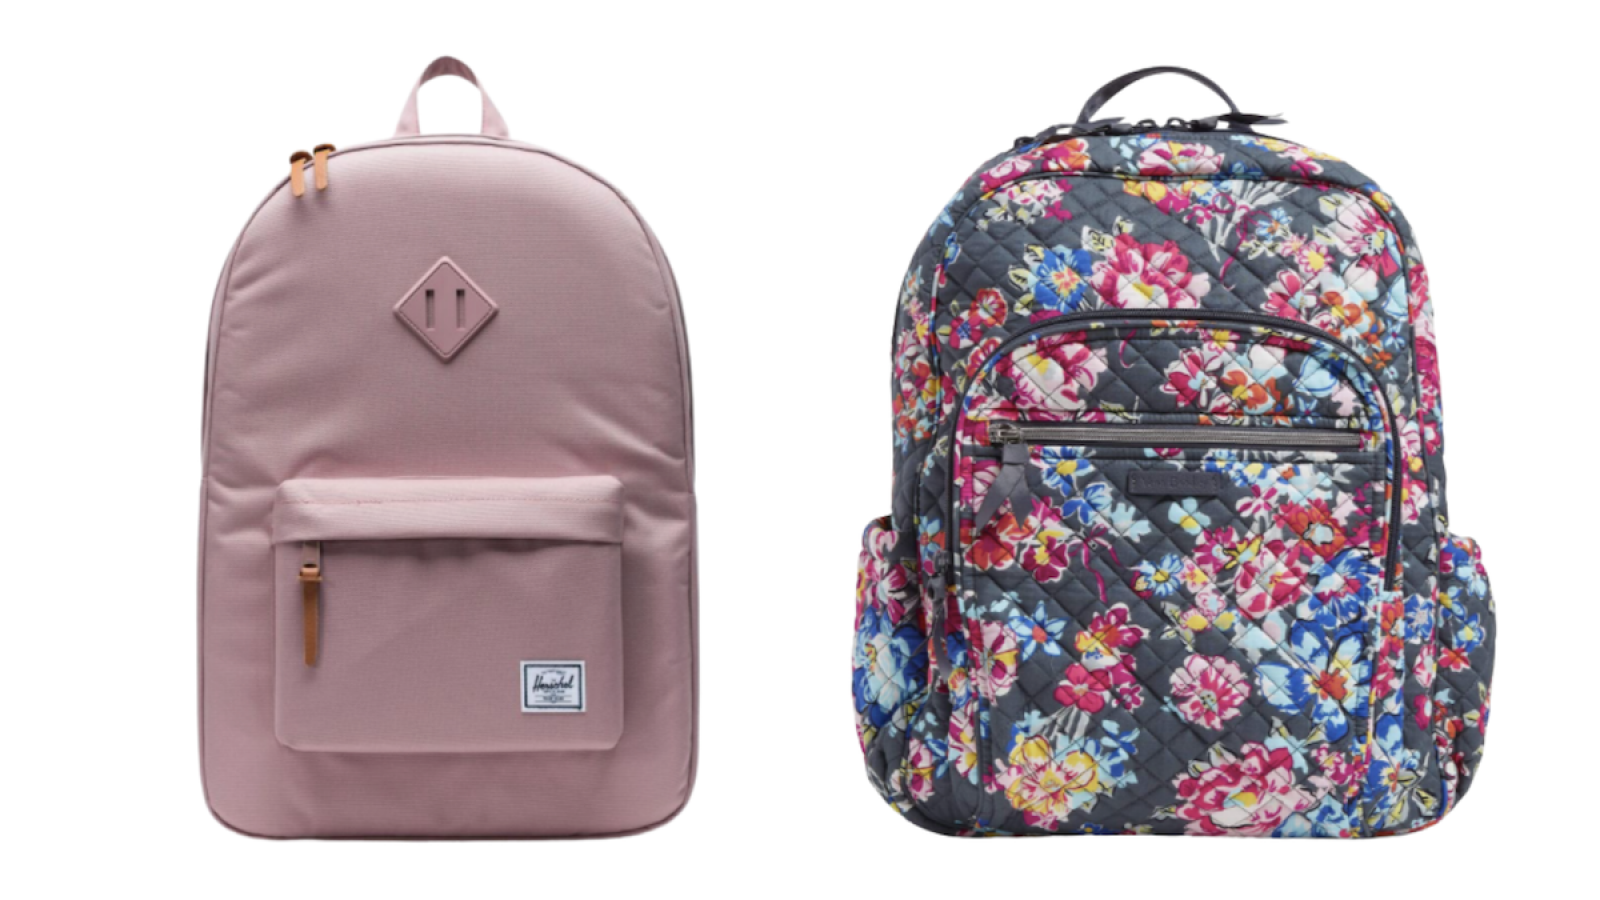 10 Epic Backpacks That Your Kids Will Brag About